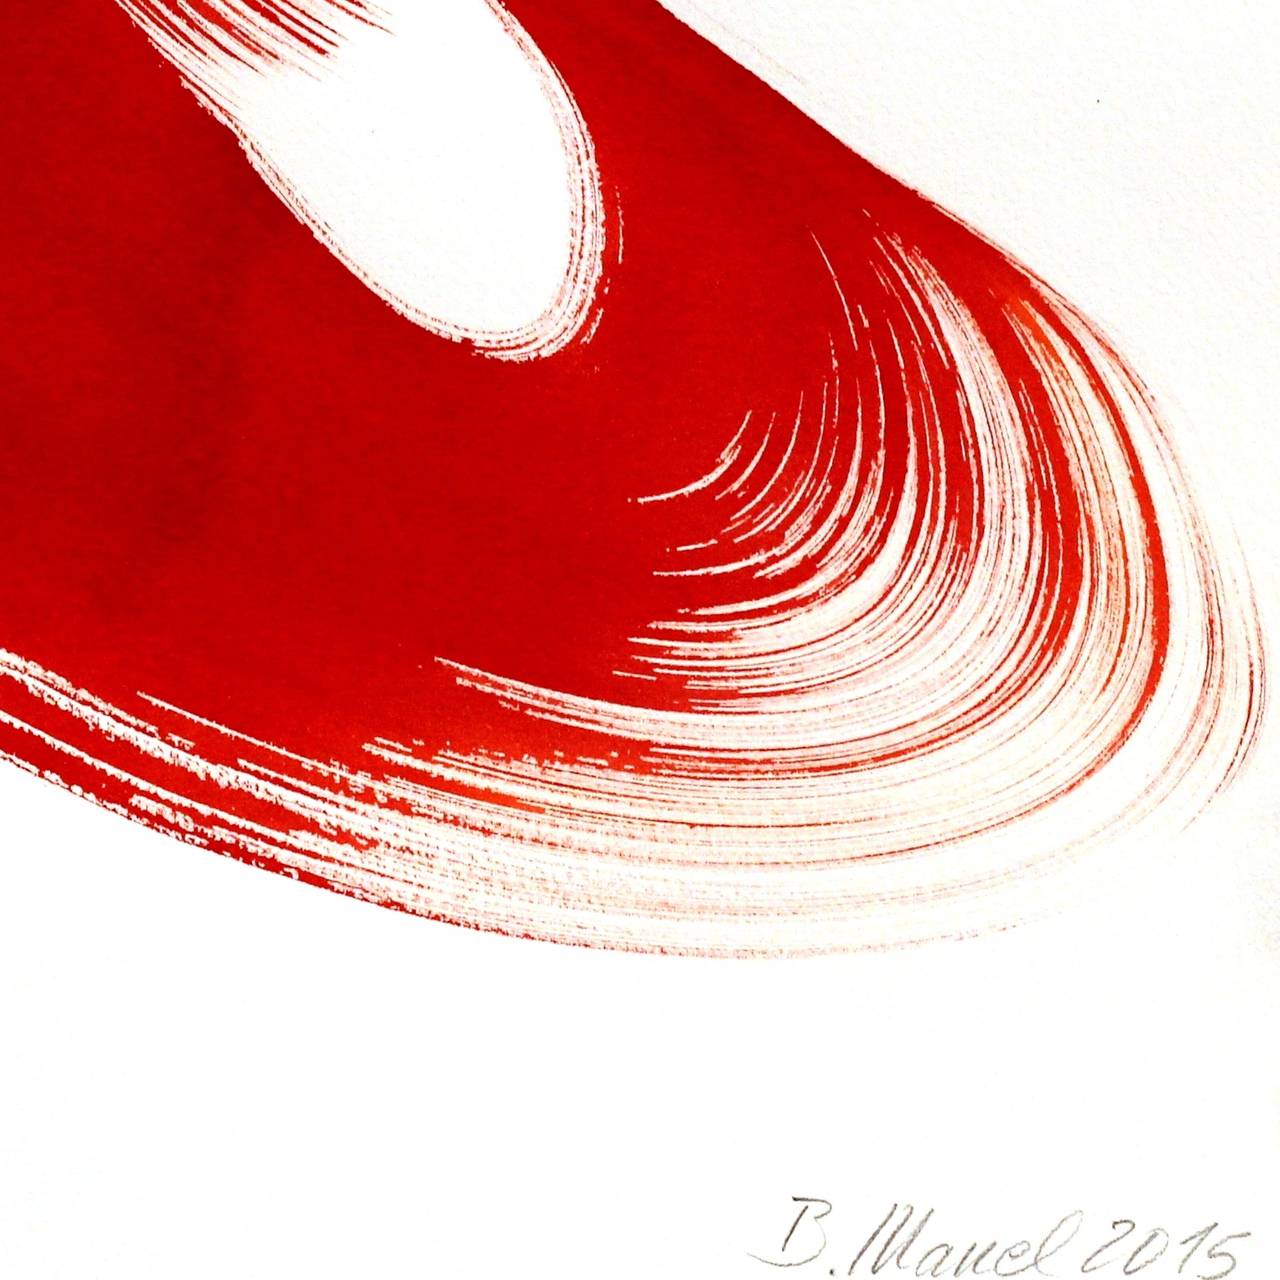 The Red Cloth 78 - Painting by Bettina Mauel